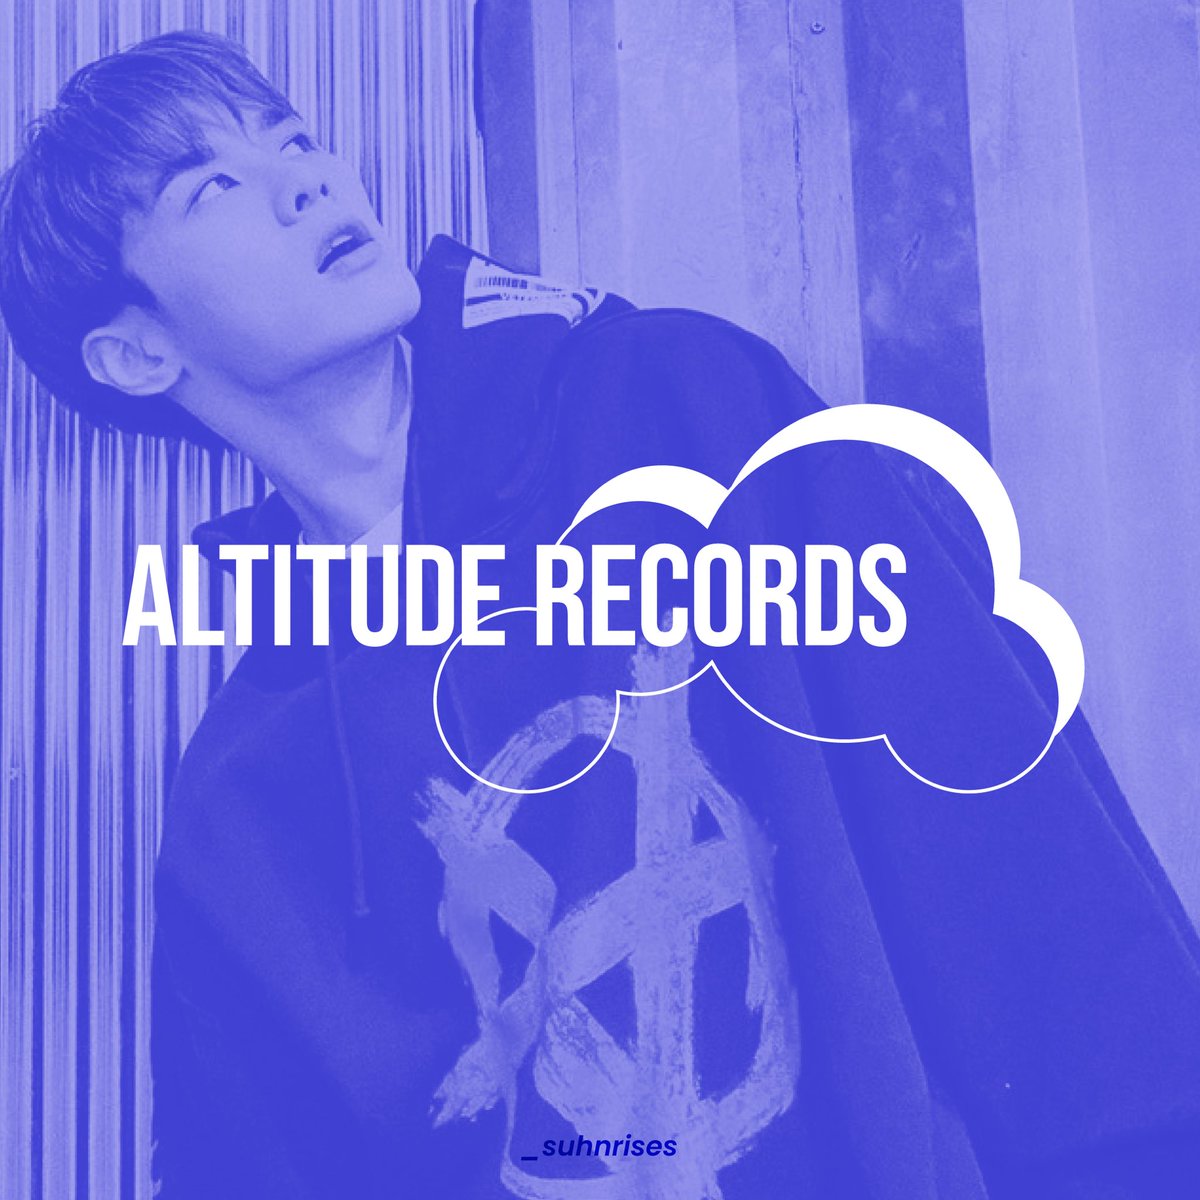 kun: altitude records- record label mm yes - called altitude bc kloud records had too much of a kardashians vibe (but the icon is still v loosely based on the shape of a cloud)- every song is a chart topper bc qian kun talented qian kun deserve